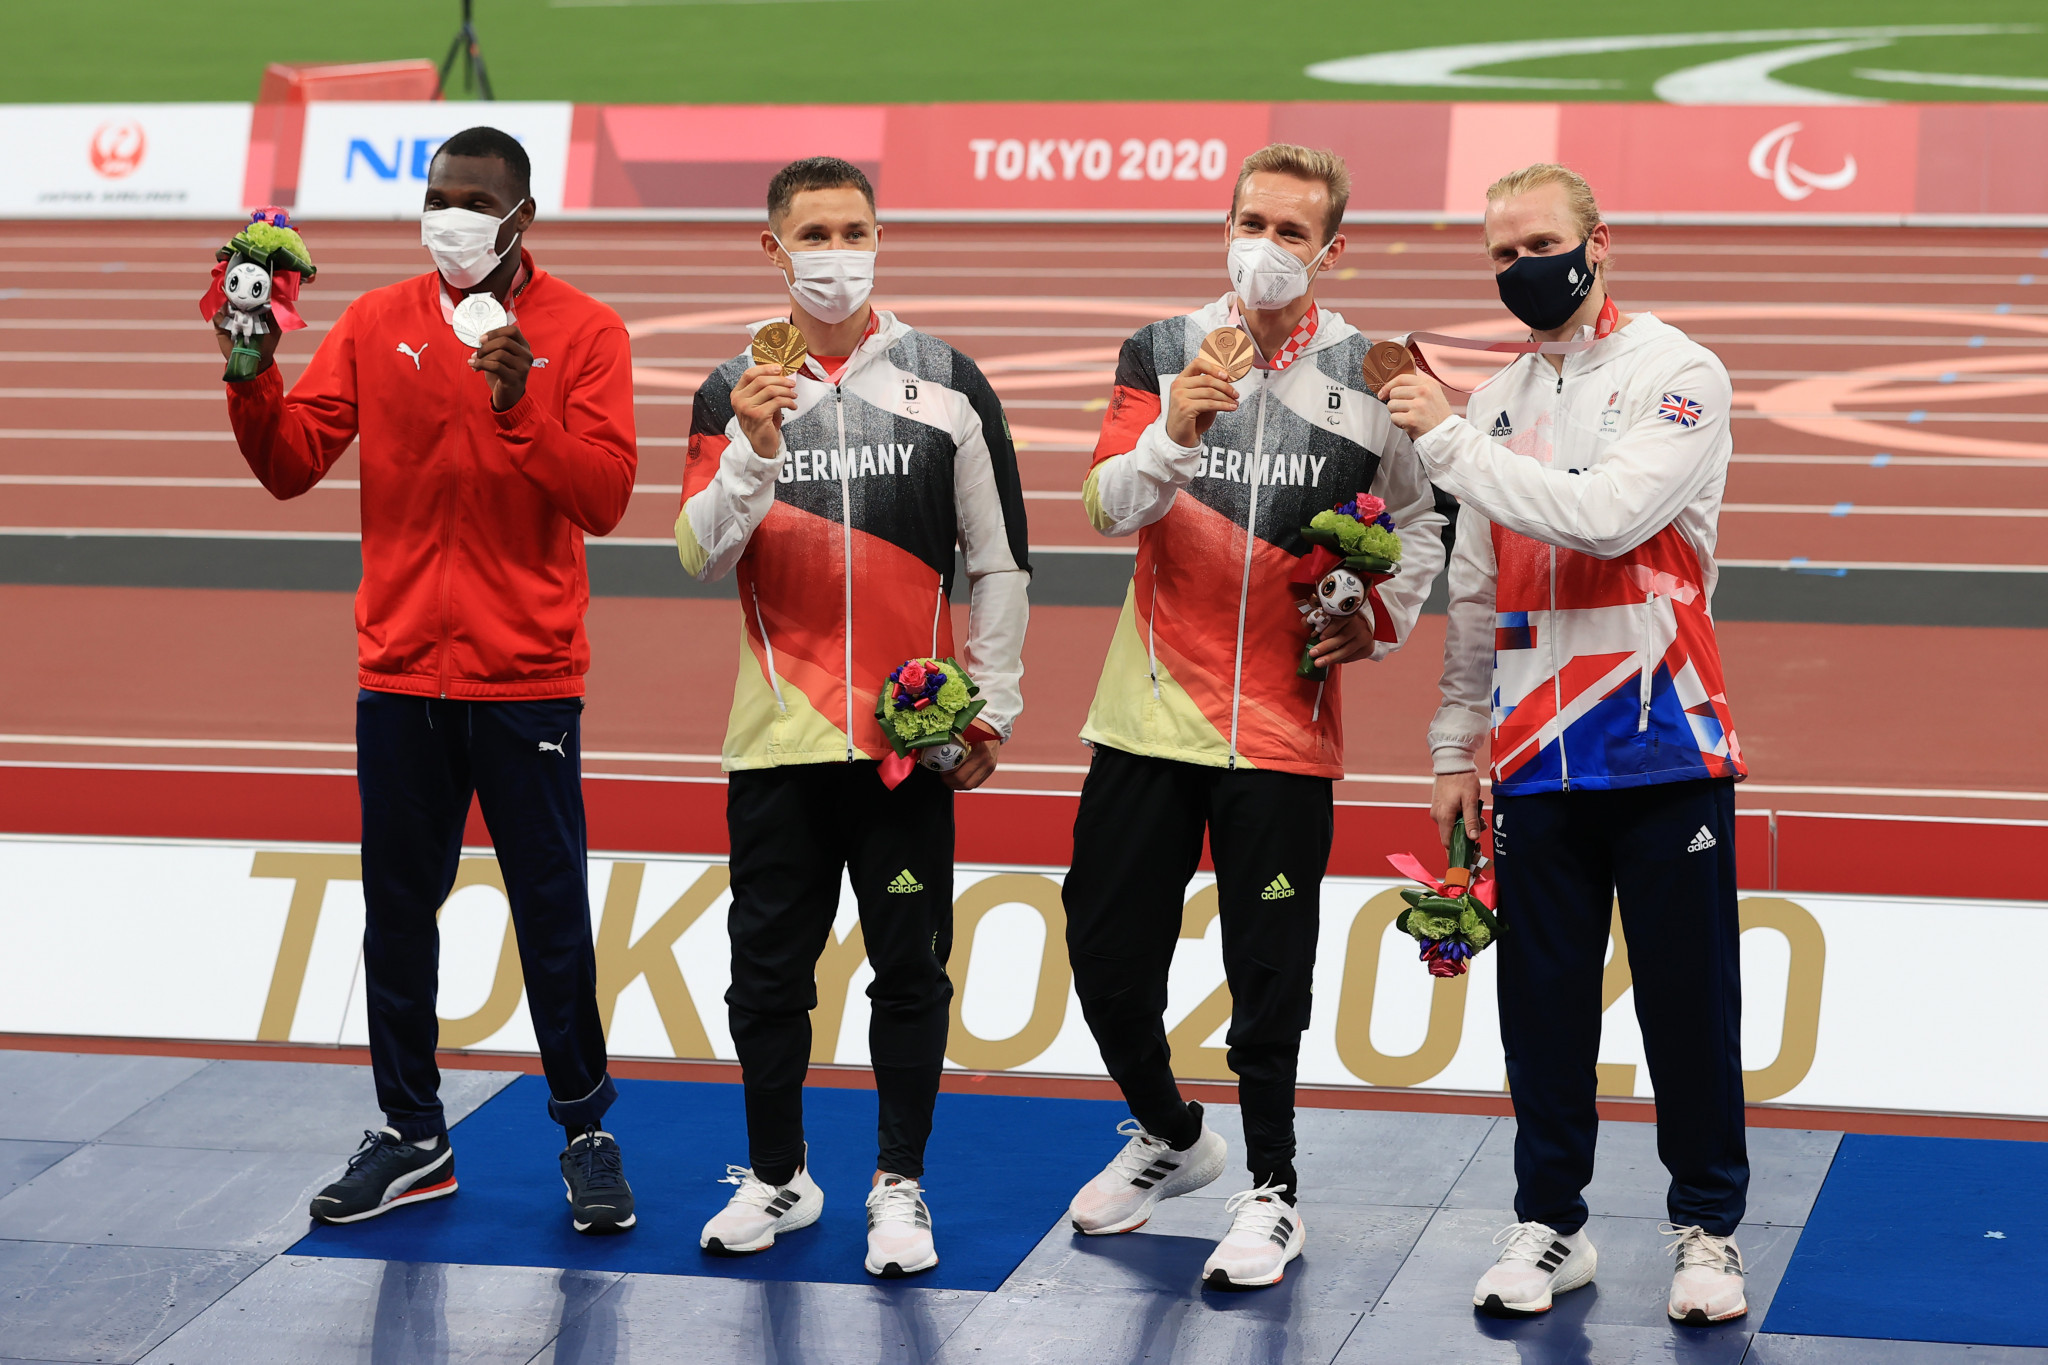 The men's 100 metres T64, which saw three hundredths of a second separate the top four, and joint bronze medallists, has been one of the highlights of the Tokyo 2020 Paralympics so far ©Getty Images